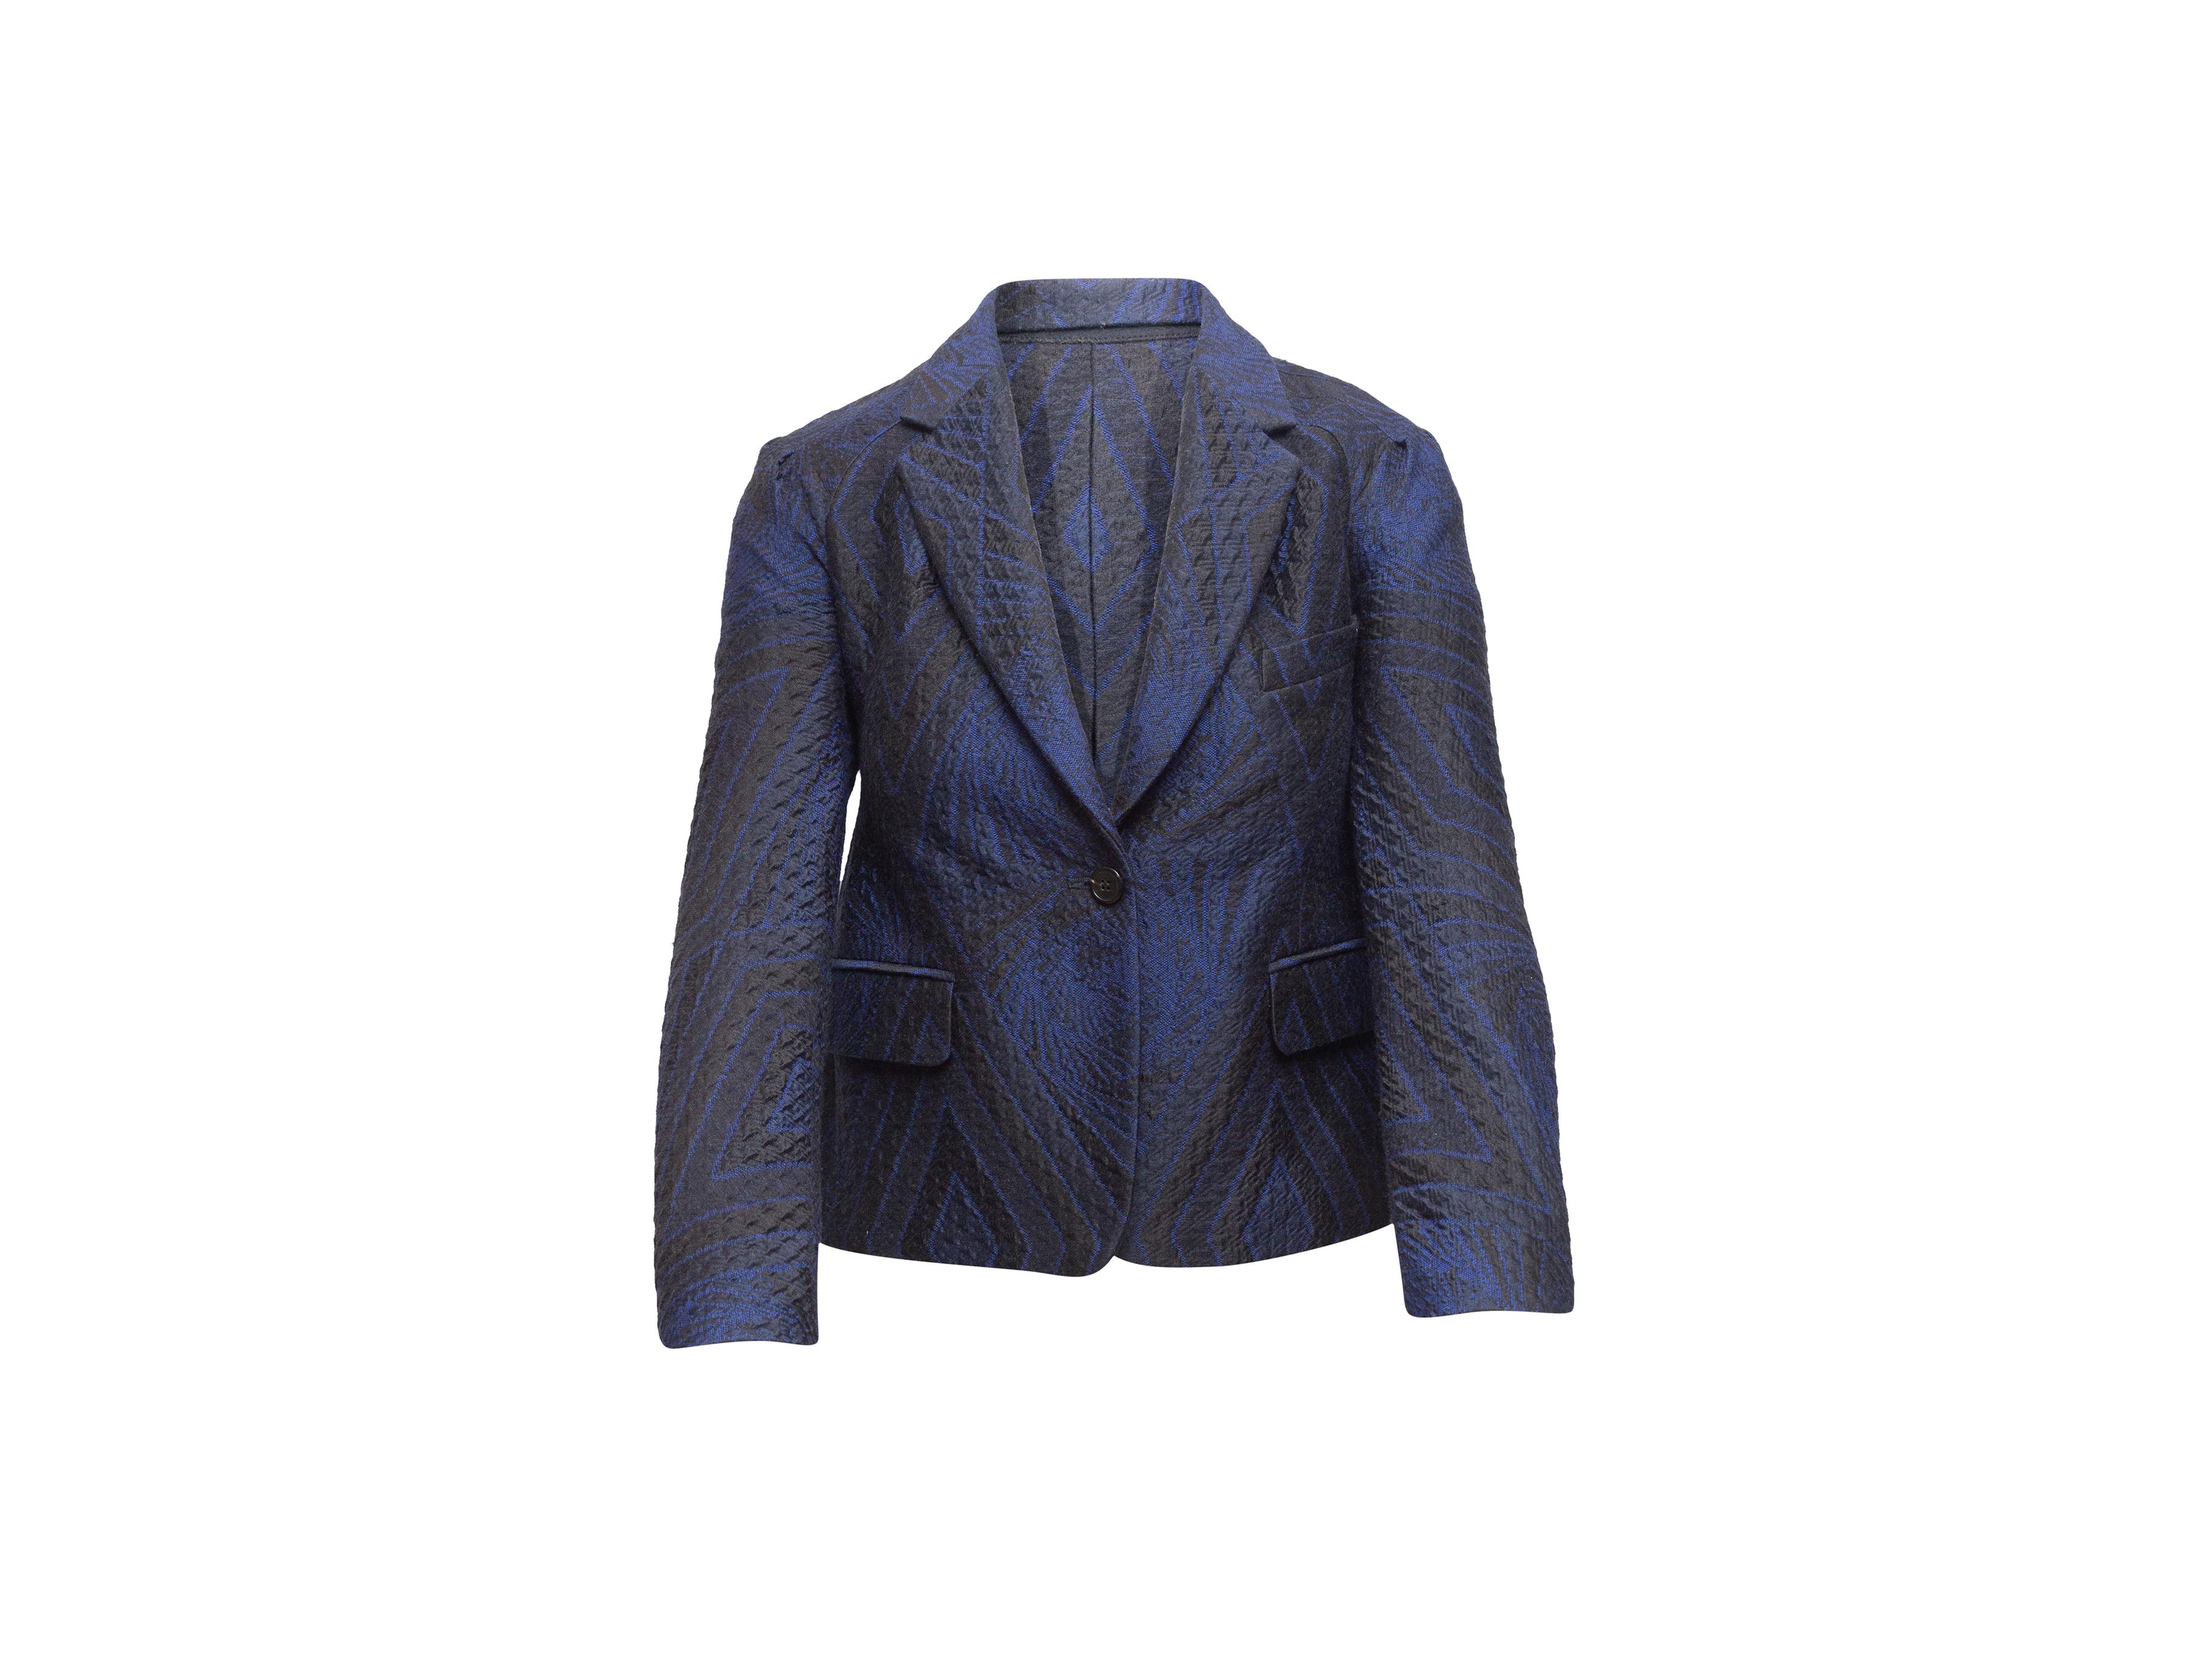 Product details: Navy and black jacquard patterned blazer by Dries Van Noten. Notched lapel. Single welt pocket at bust. Dual flap pockets at hips. Button closure at front. Designer size 38. 31